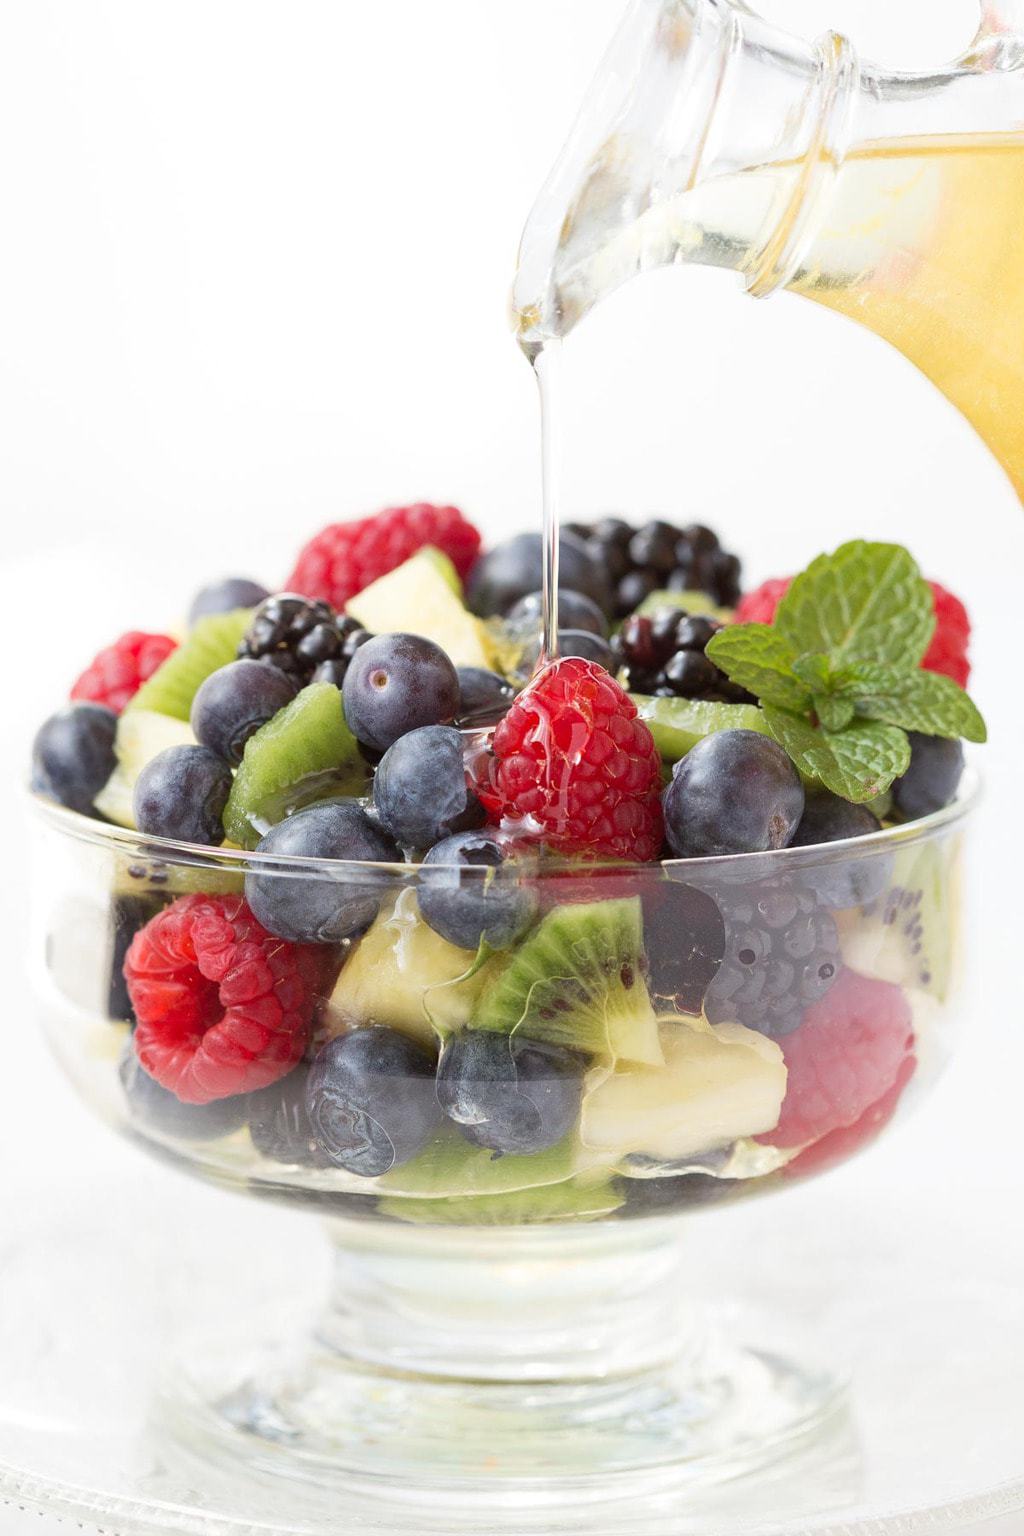 Vertical photo of Limoncello Syrup being poured over fresh fruit in a glass serving bowl.